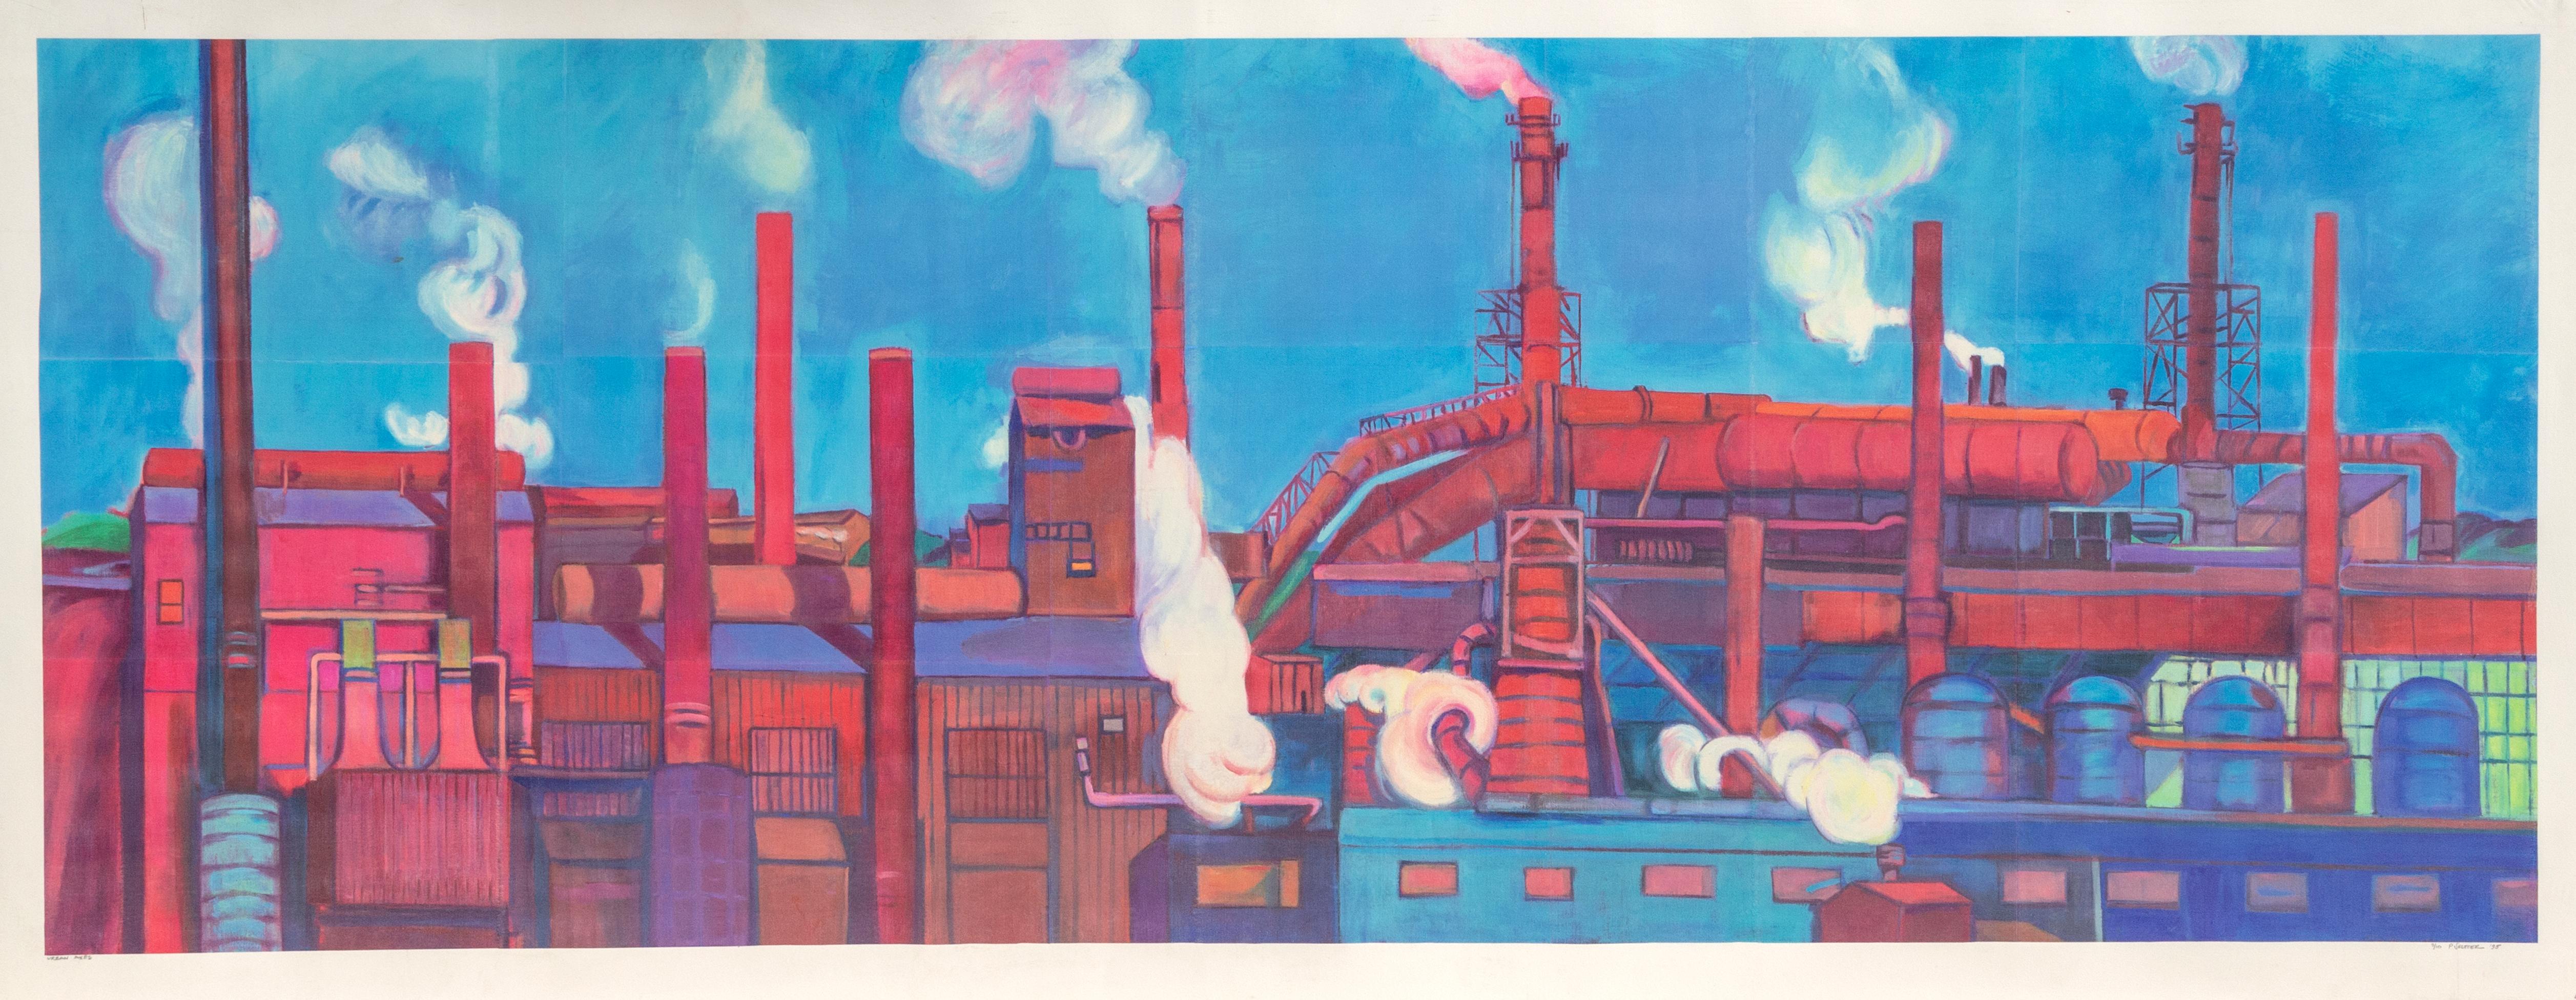 Urban Axes, Large Industrial Print by Phyllis Seltzer